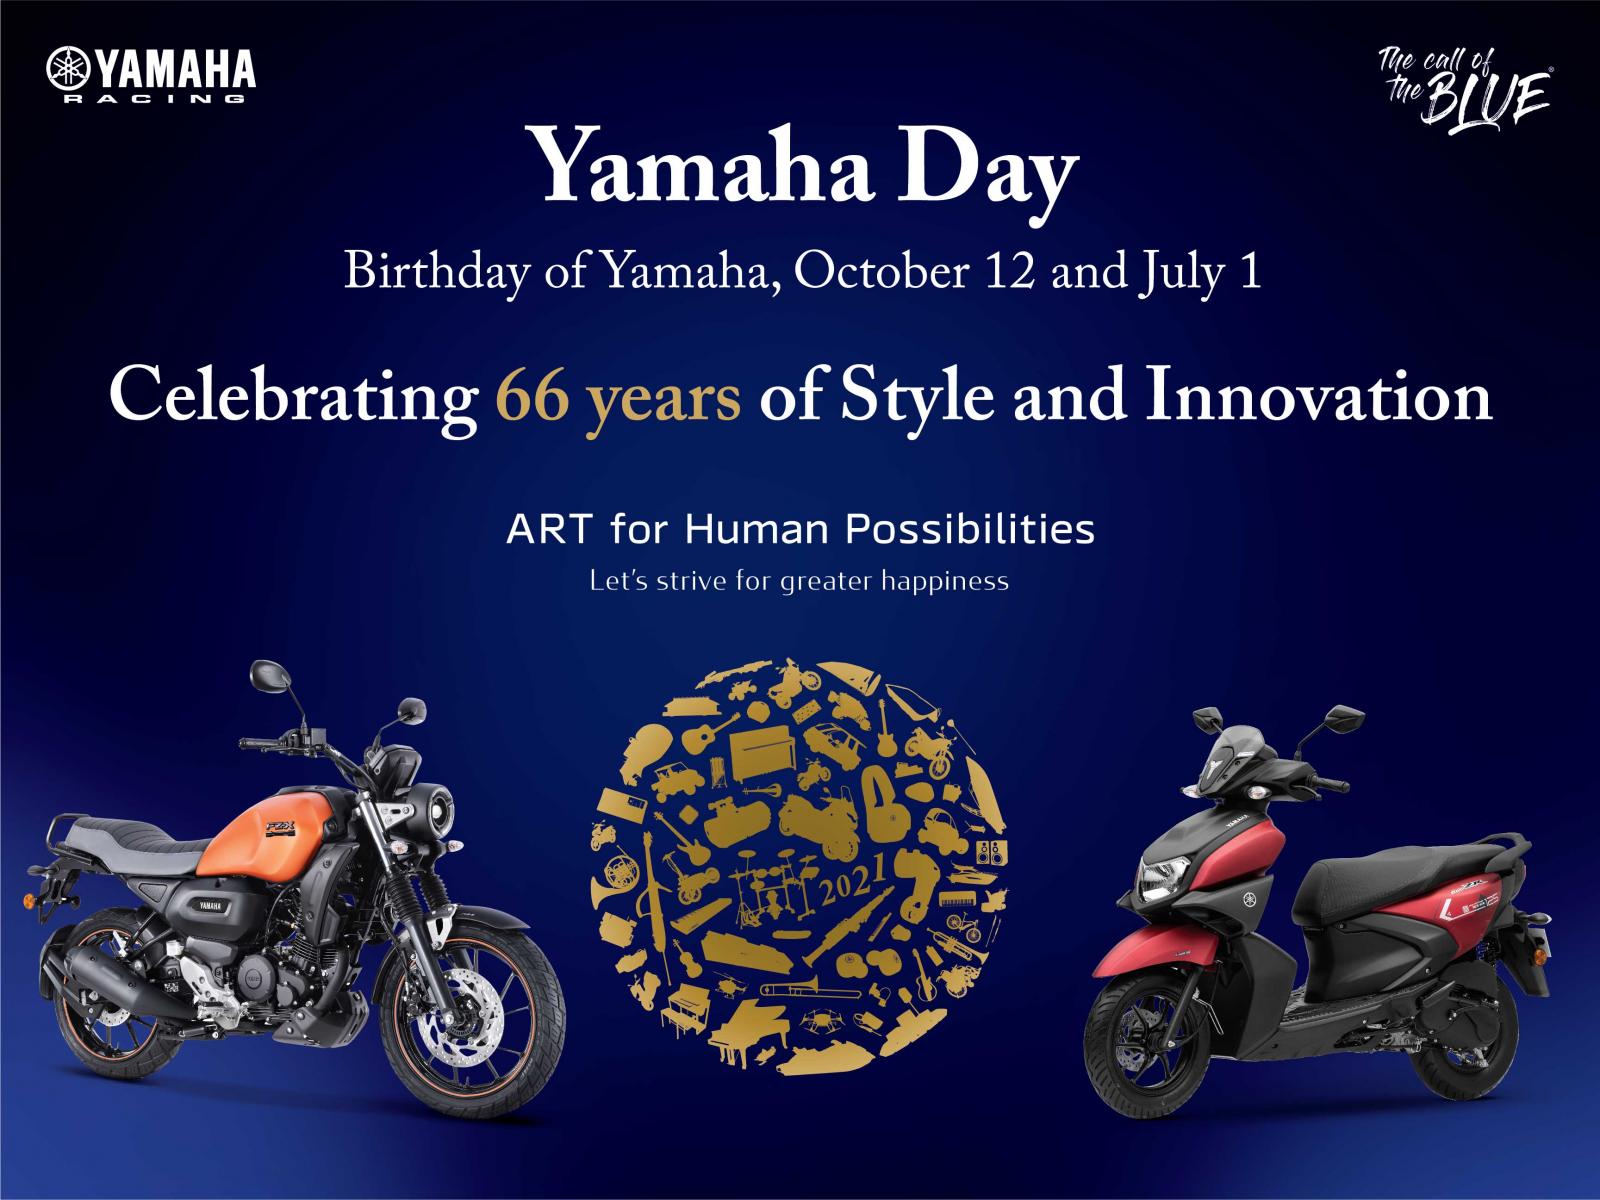 2018 Yamaha Fascino Launched In India - Price, Engine, Specs, Booking